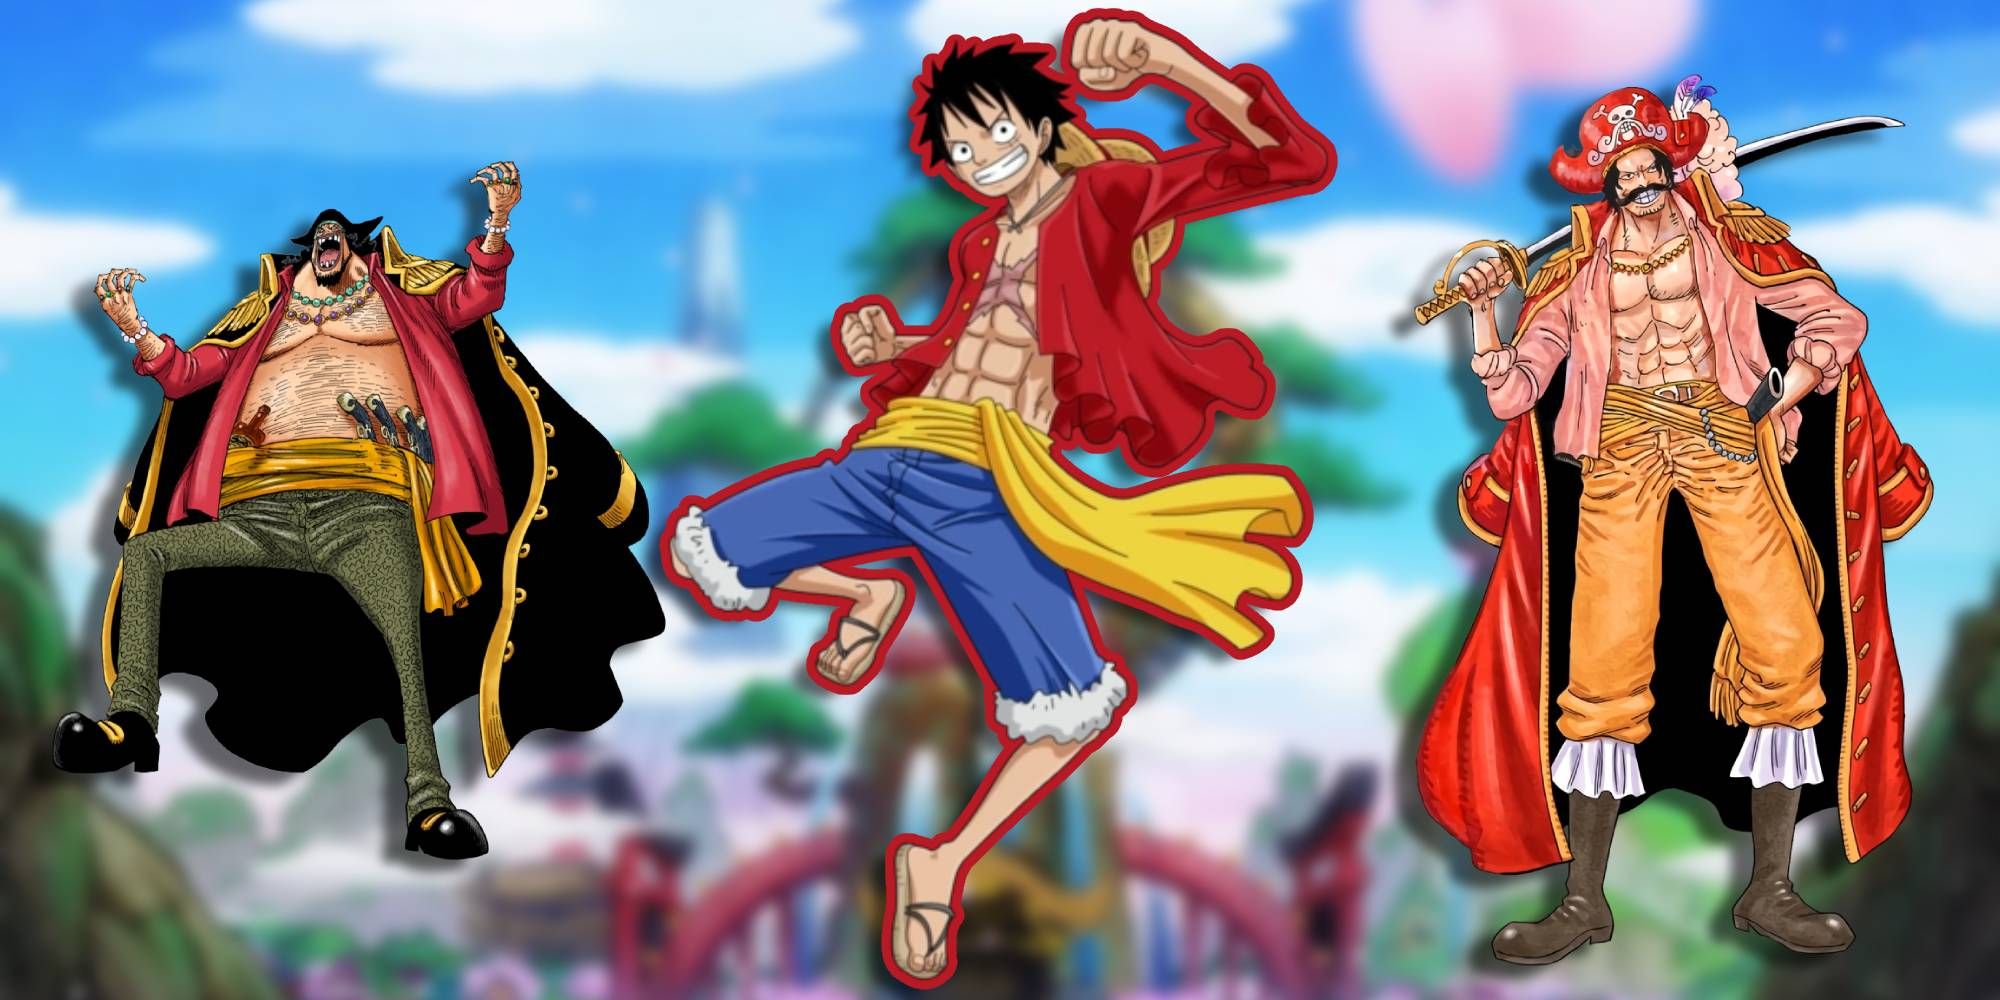 What is the Will of D Luffy, Teech, and Roger